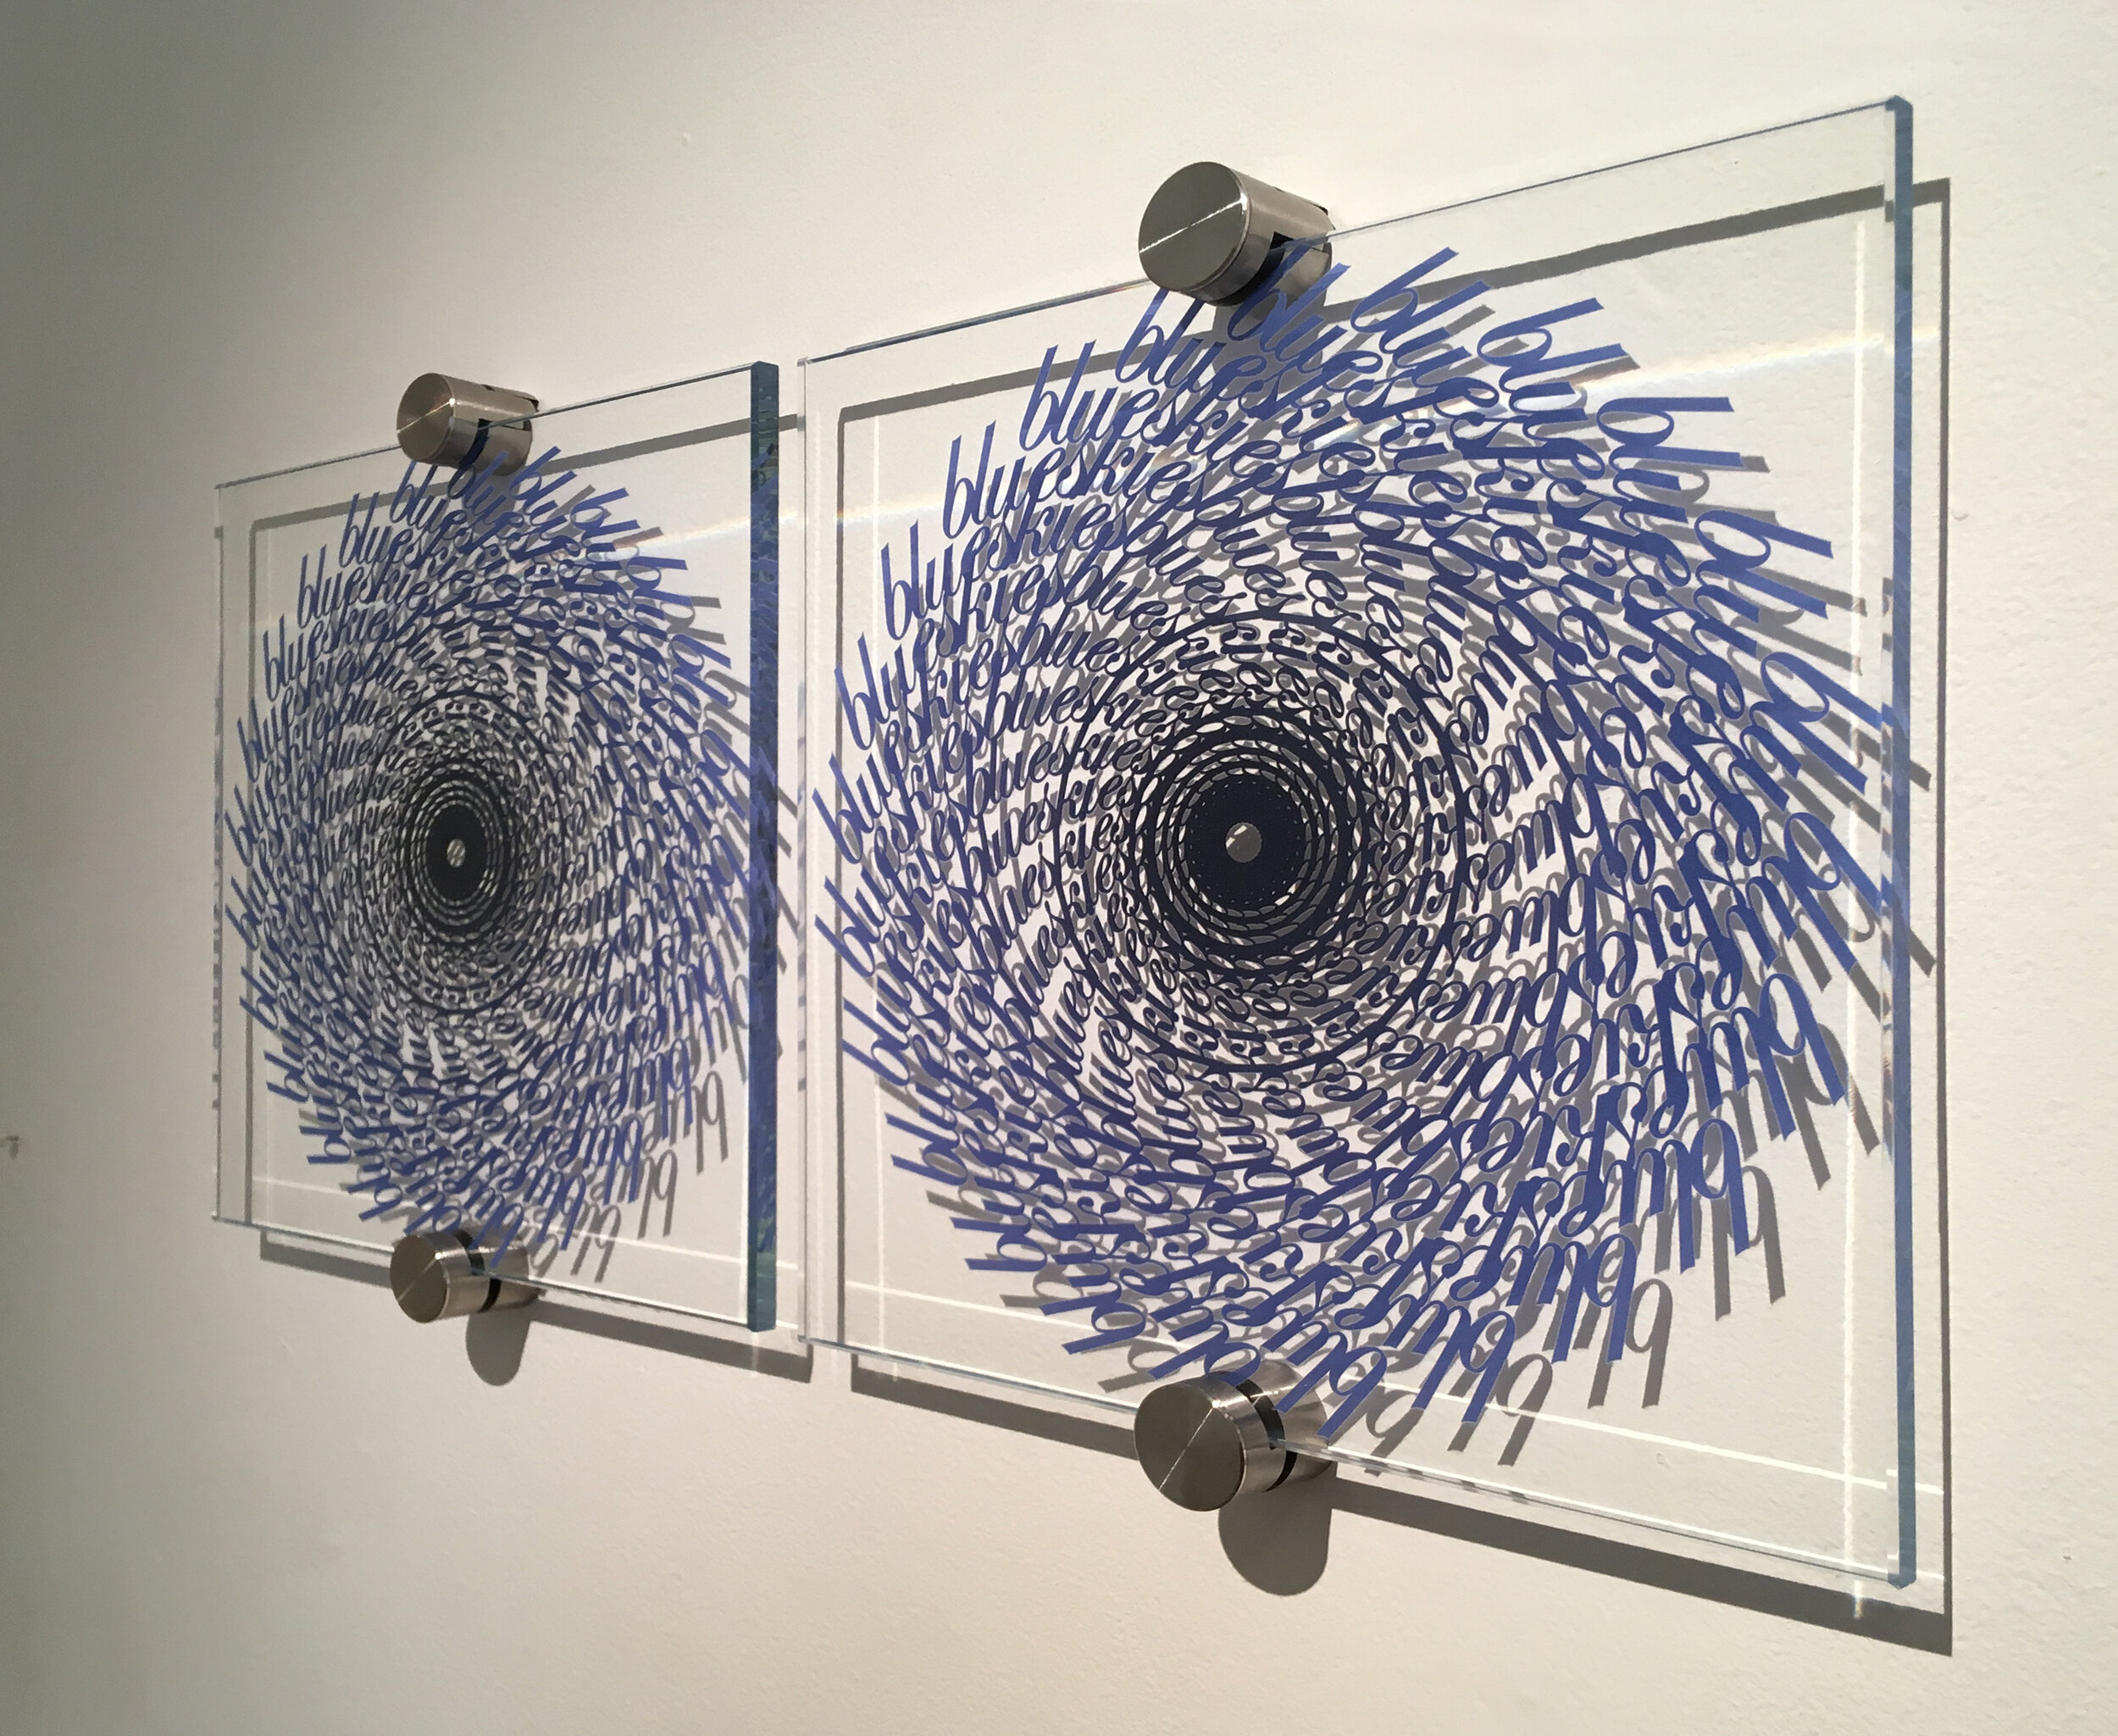   Doilies: Blue Skies -  glass, ceramic ink, and hardware 